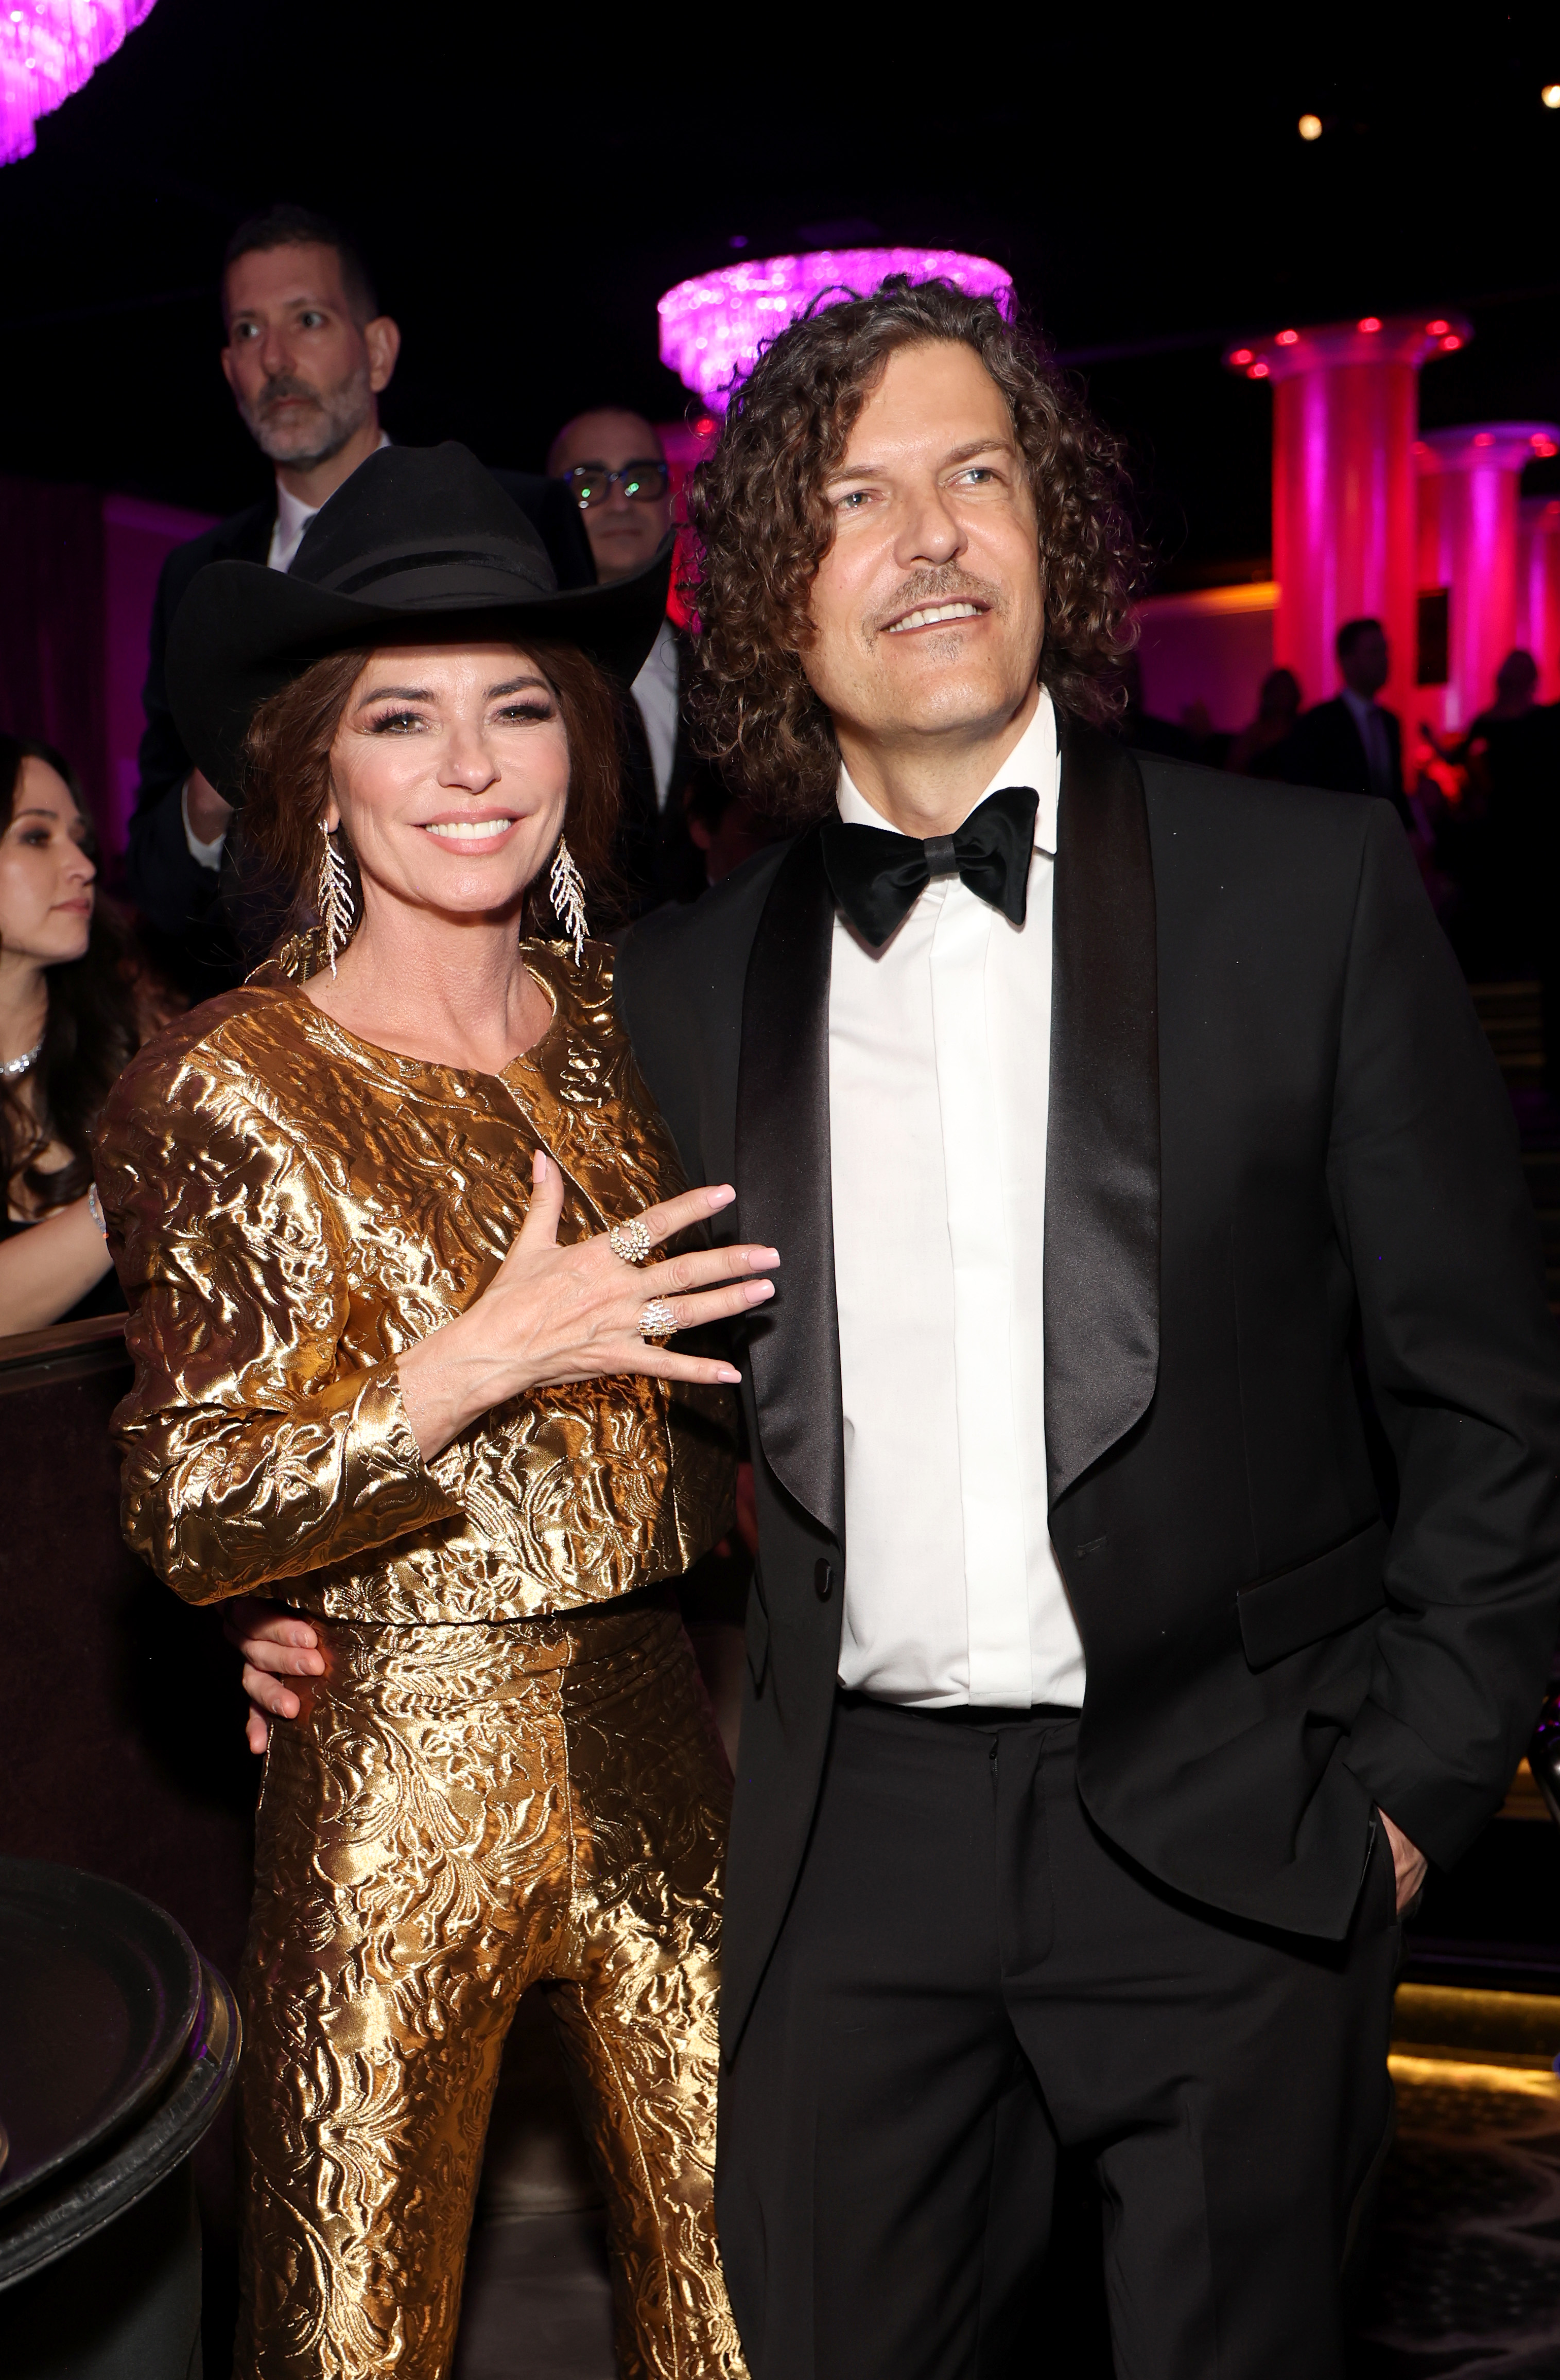 Shania Twain and Frédéric Thiébaud attend the Pre-Grammy Gala & Grammy Salute at The Beverly Hilton on February 3, 2024 in Los Angeles, California. | Source: Getty Images